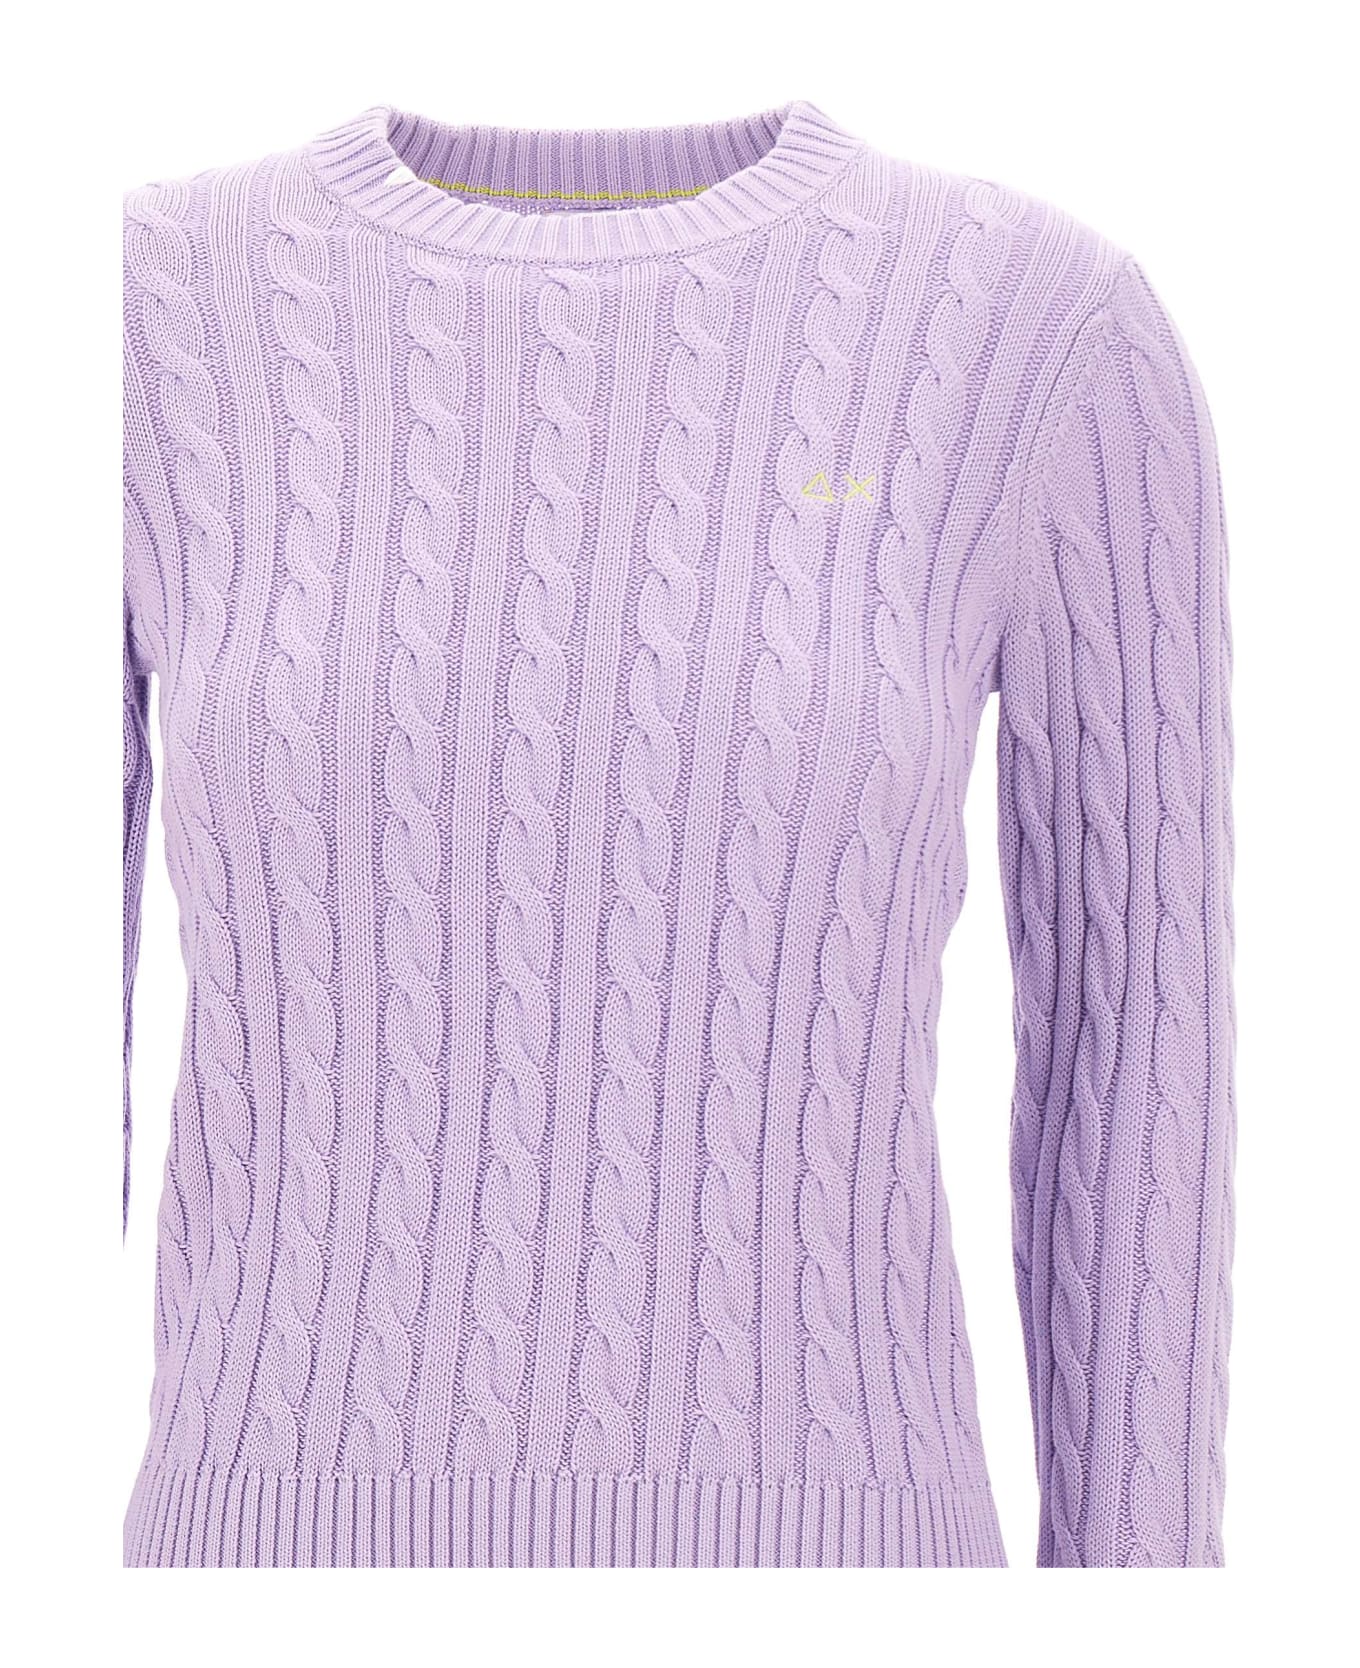 Sun 68 "round Neck Cable" Sweater Cotton - LILAC